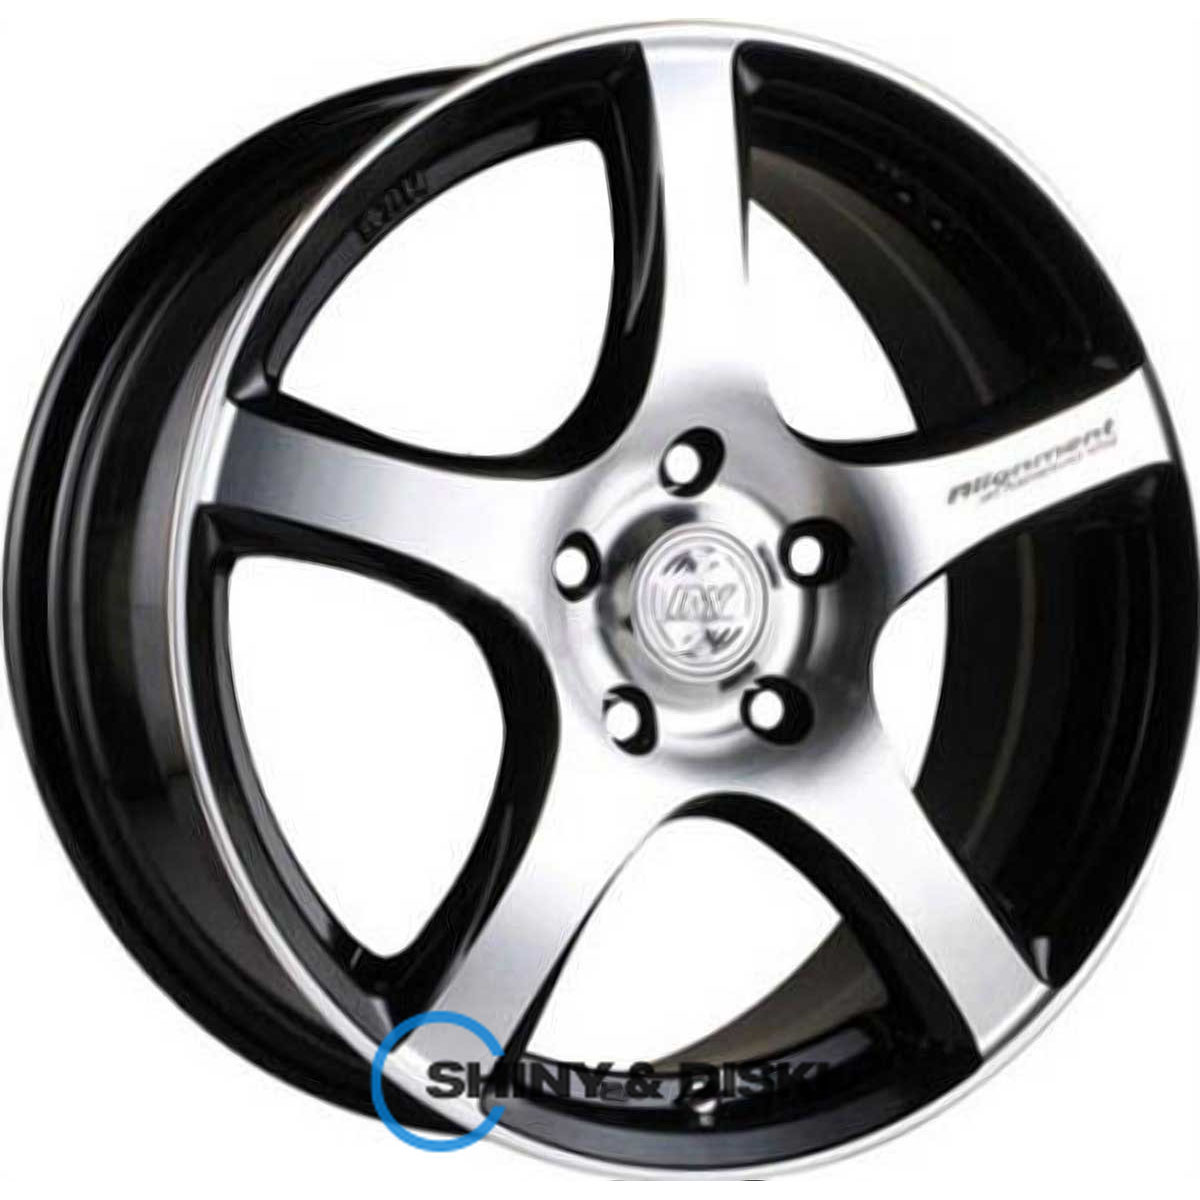 rs tuning h-531 bkfp r16 w7 pcd5x114.3 et40 dia73.1